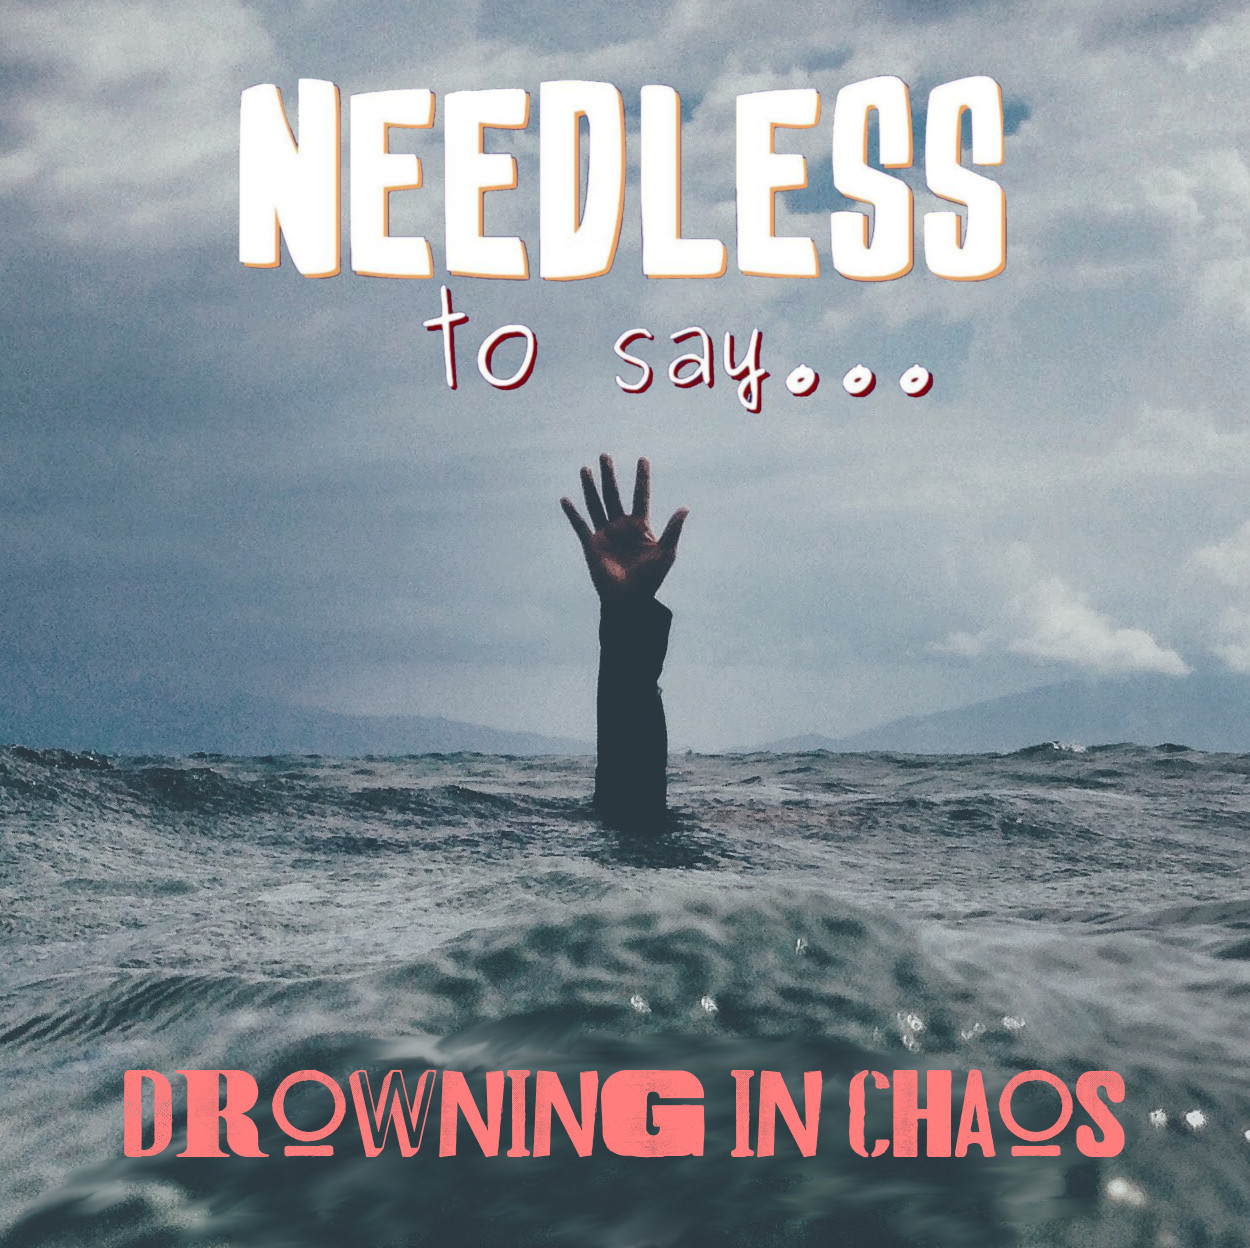 Drowning in Chaos Image